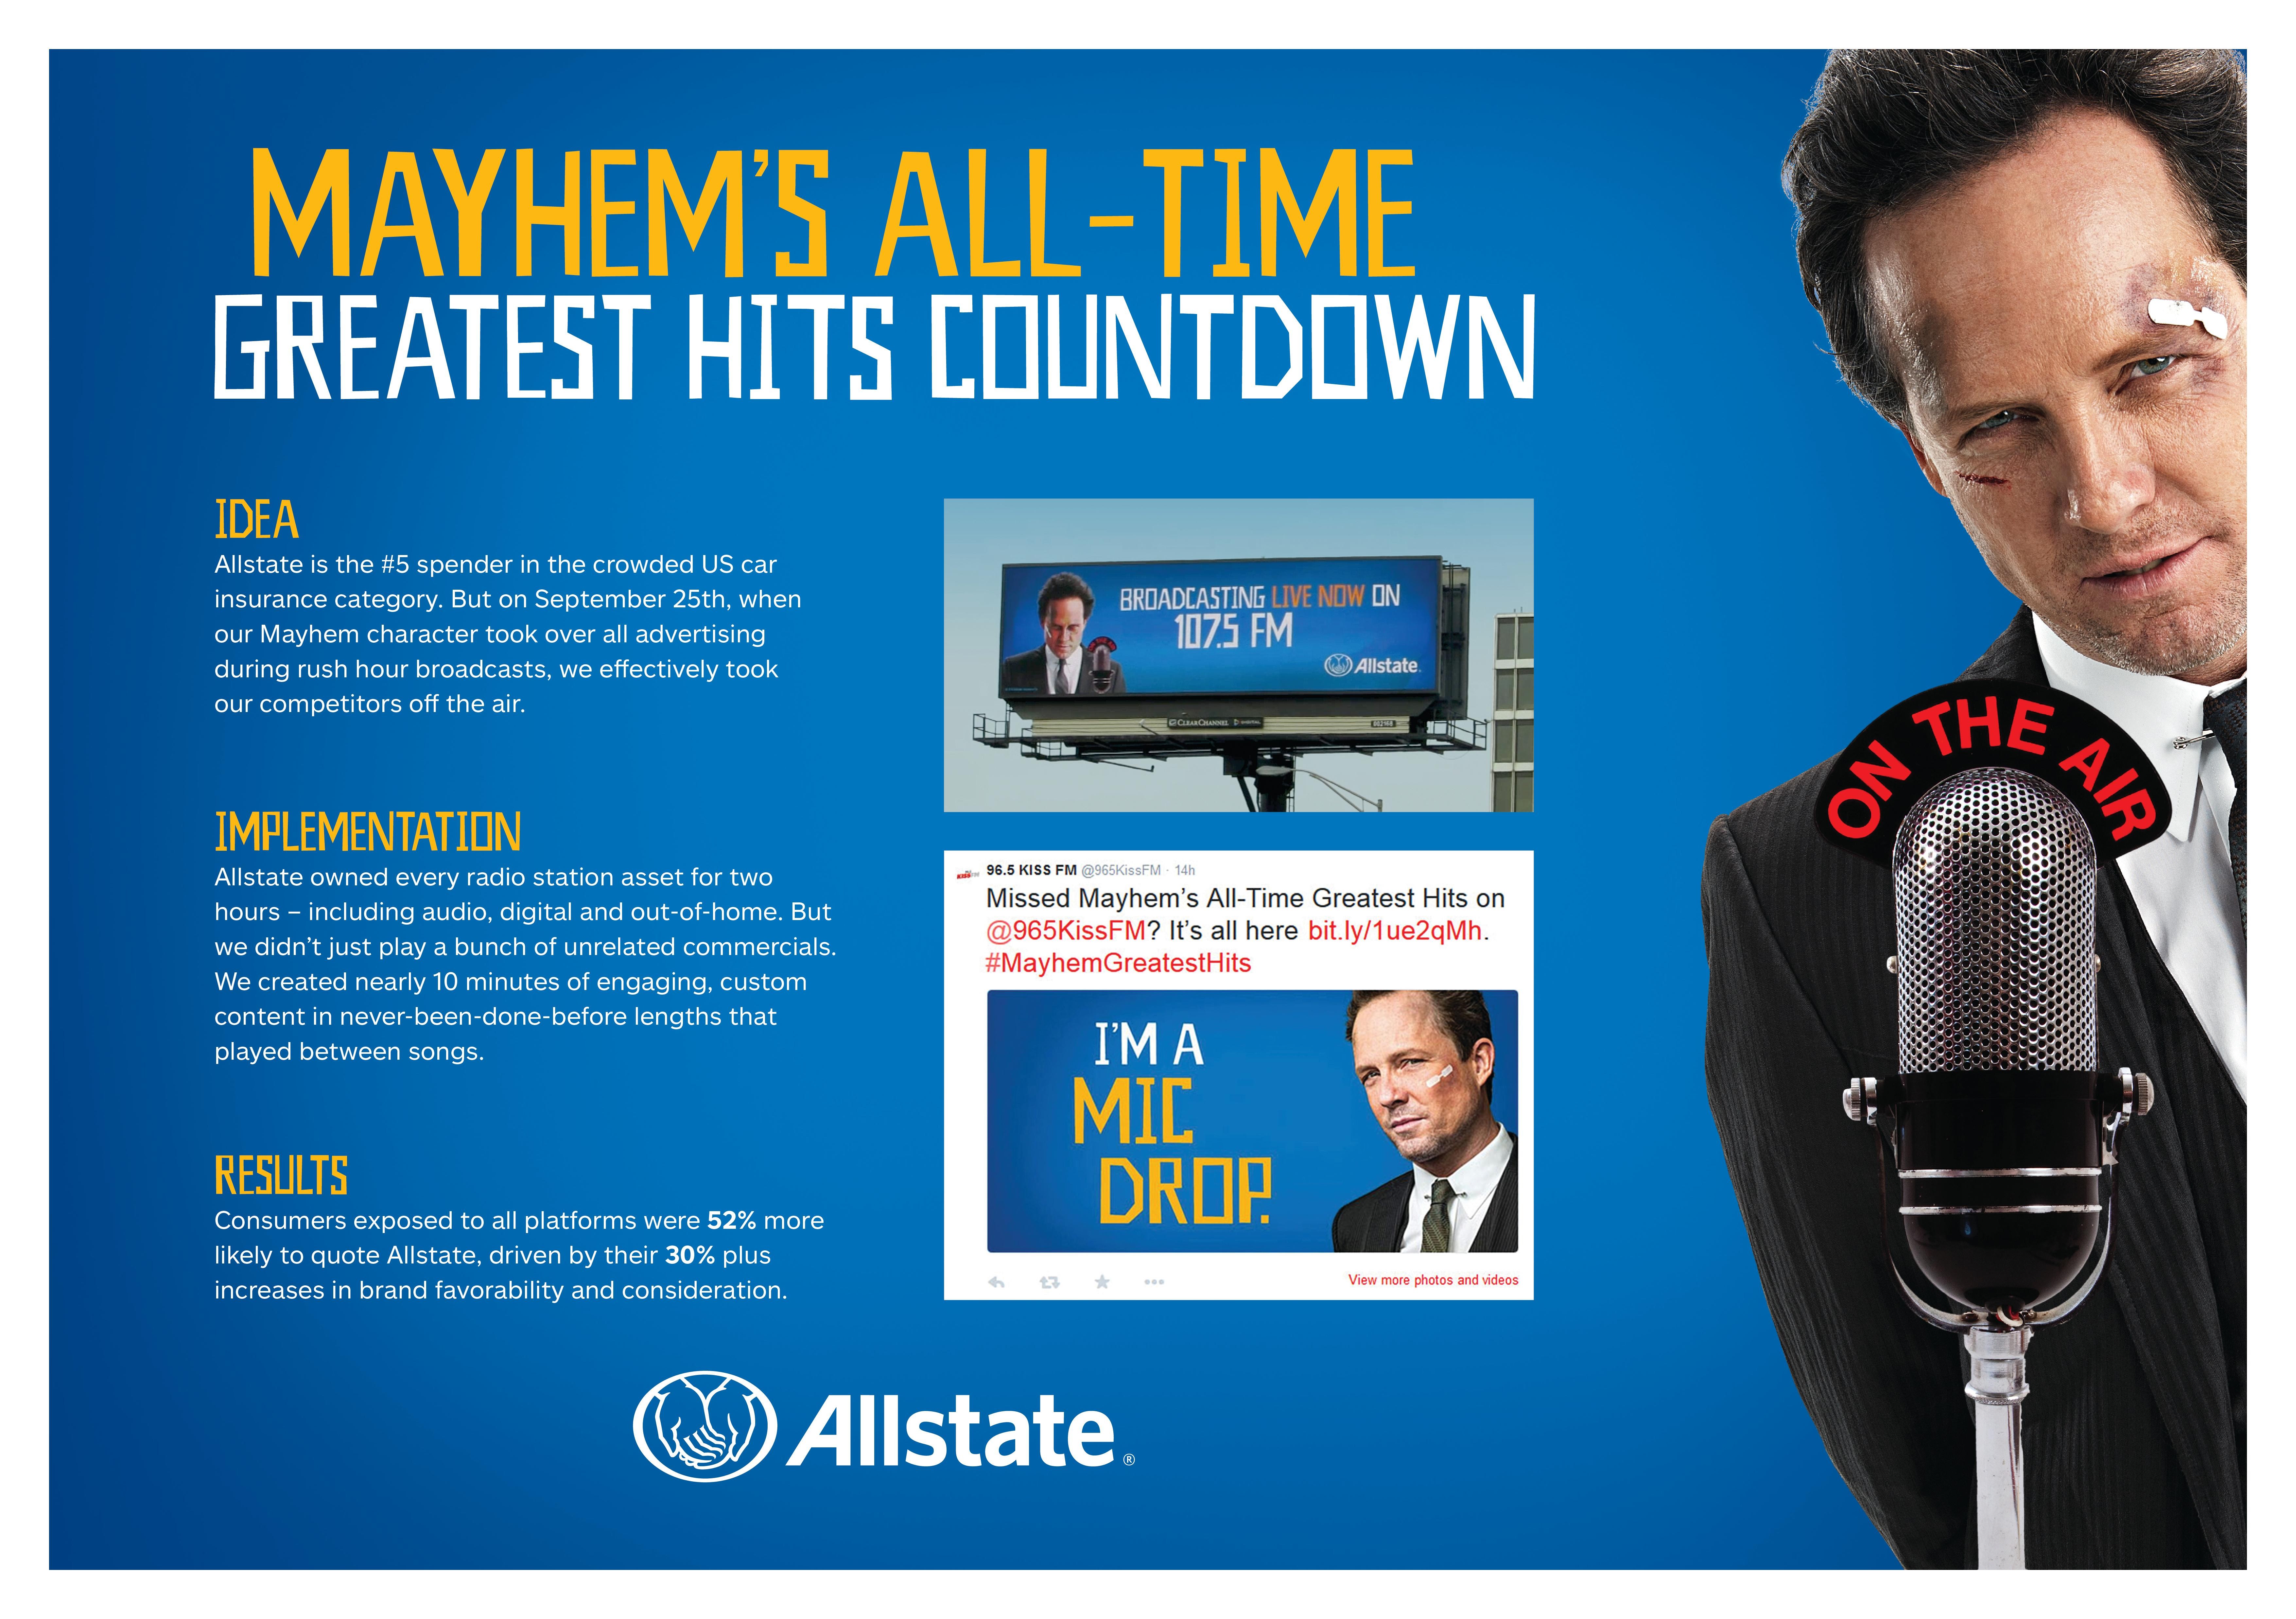 MAYHEM’S ALL-TIME GREATEST HITS COUNTDOWN